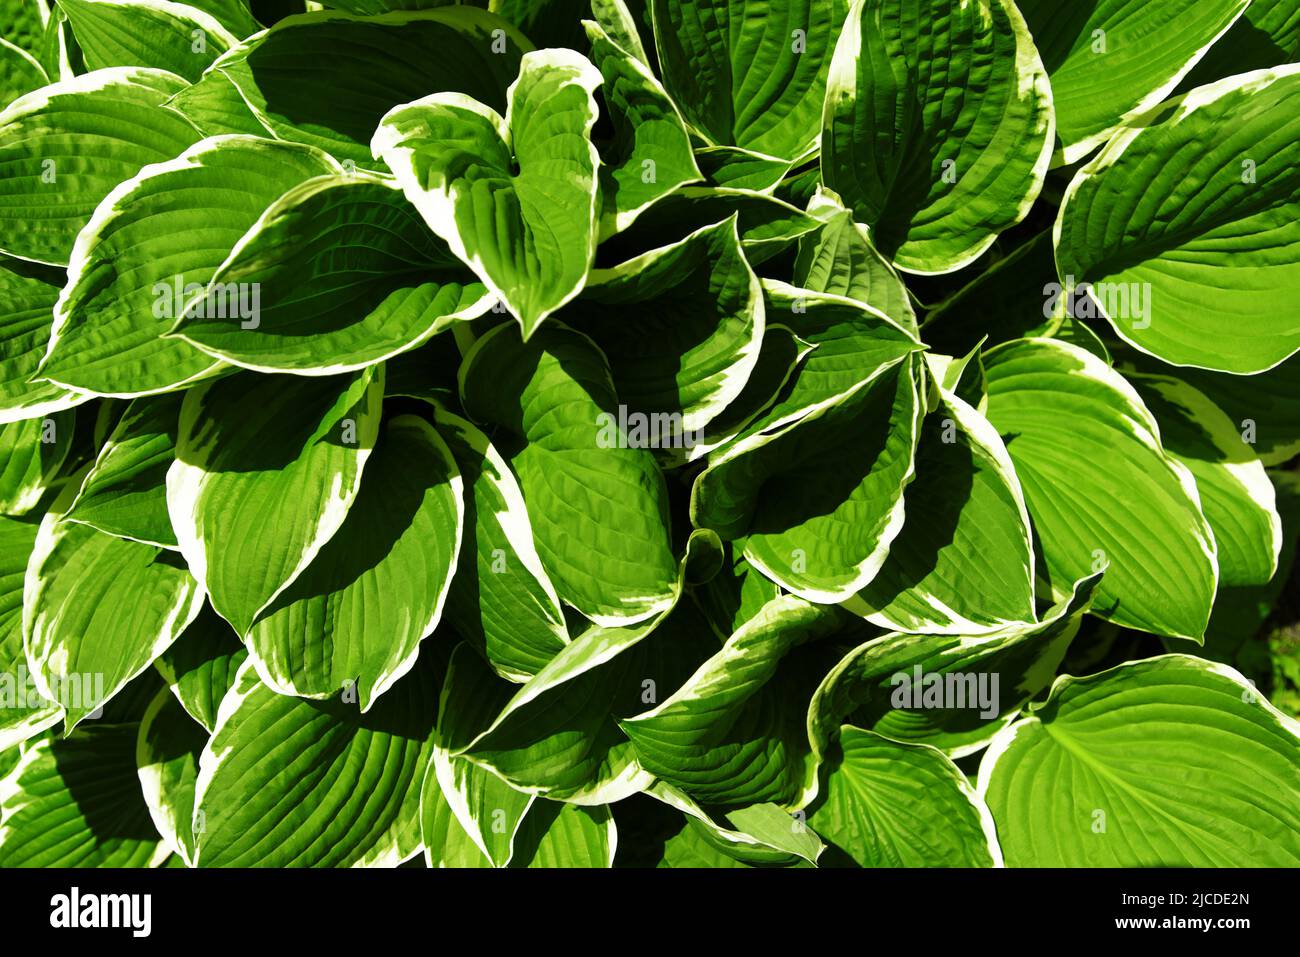 Hosta green leaves bordered by white rim. Fresh lush foliage in sunlight. Natural background. Selective focus Stock Photo